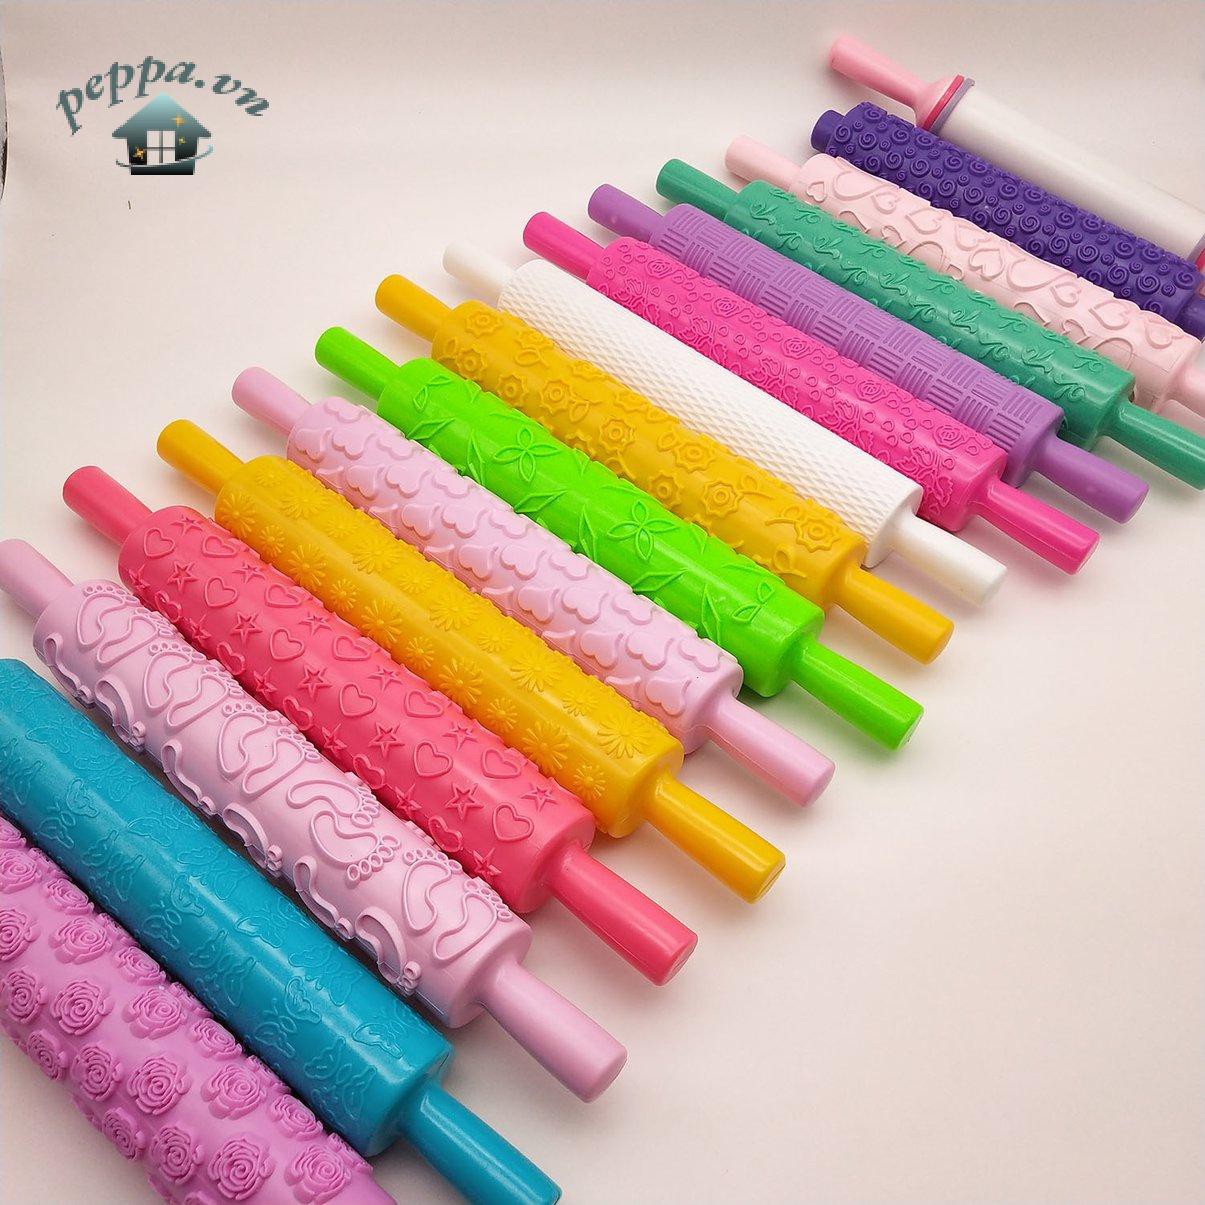 Portable Embossed Rolling Pin Heart Pattern Fondant Pastry Cake Decor Tool